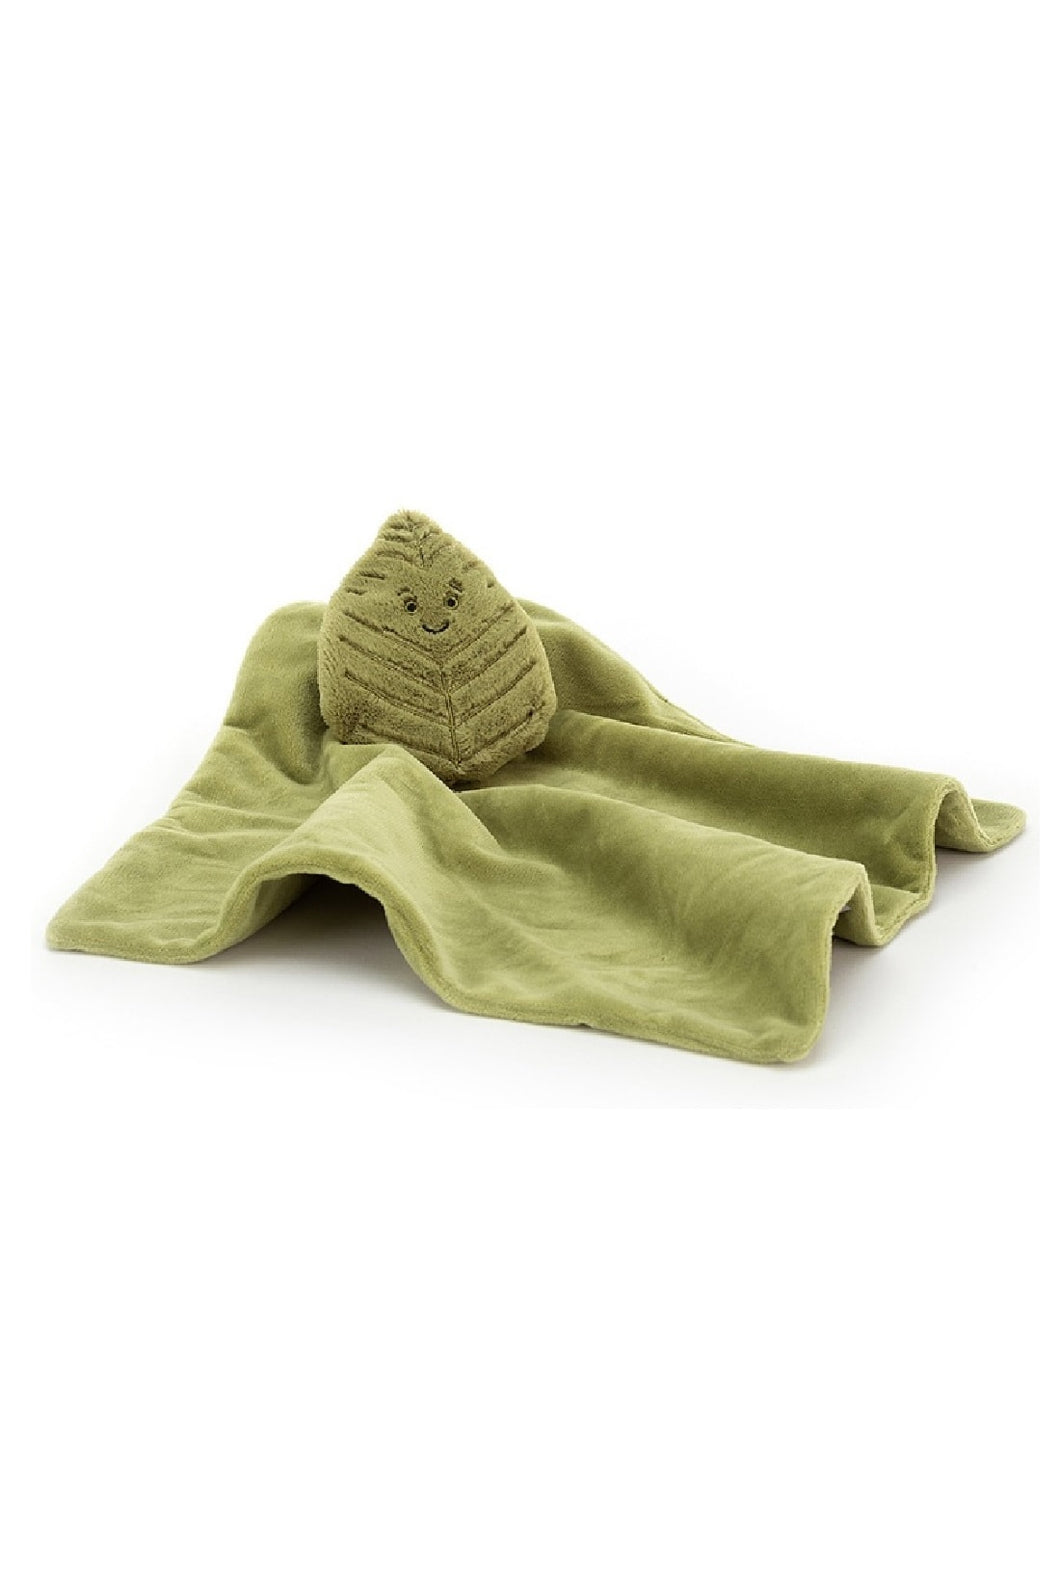 Jellycat Woodland Beech Leaf Soother